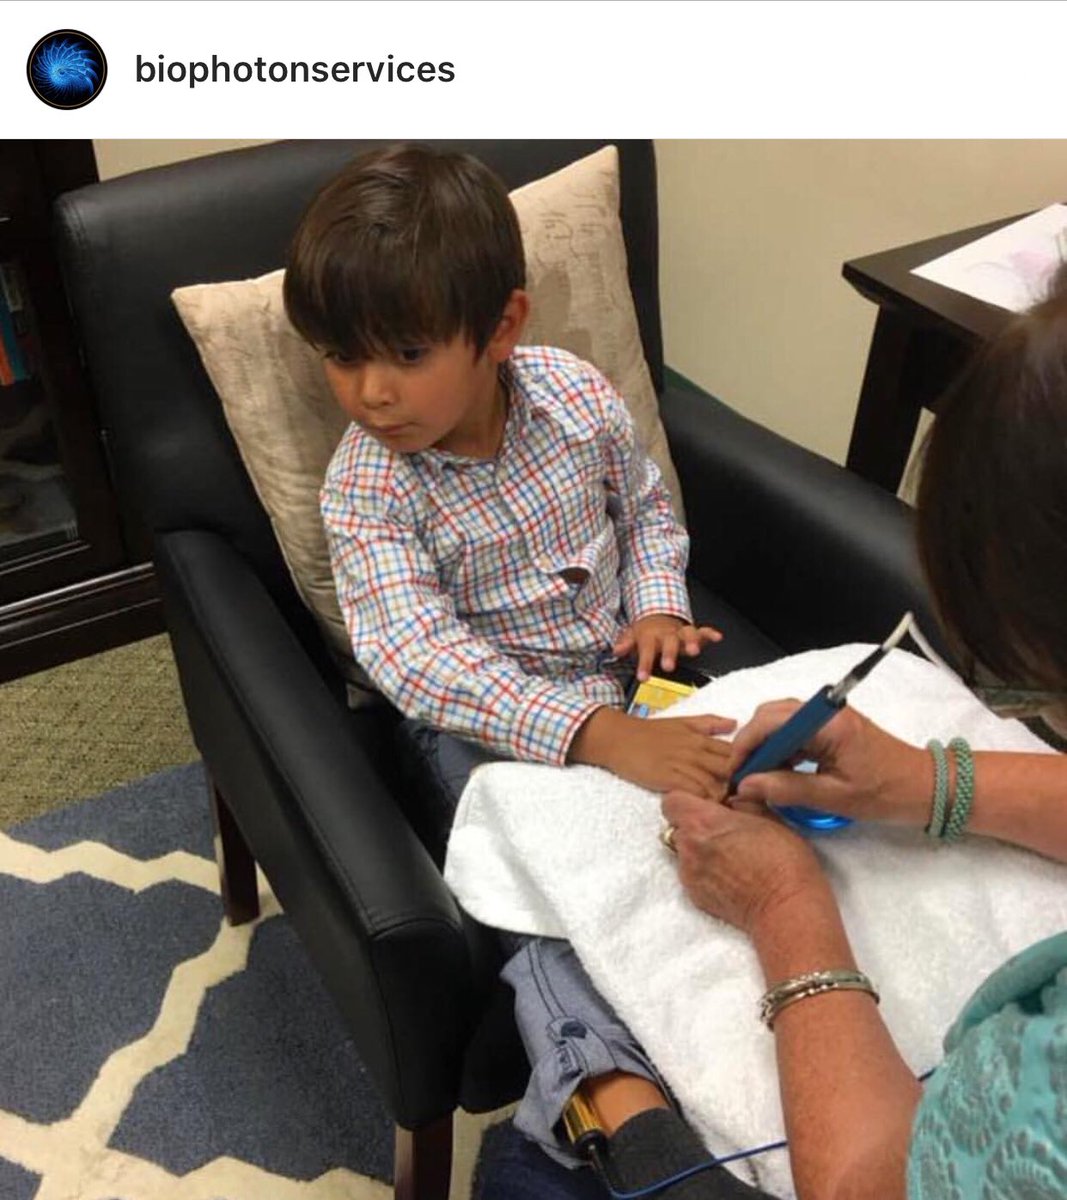 Clients come in all sizes 😍✨🌎 Measurement of the meridians identify where biophotons are emitting chaotic light within the cells.  #biohack #biophotons #cellularrenewal #cellularregeneration #lightlanguage #naturalparenting #fitfam #healthylifestyle #advancedtechnology